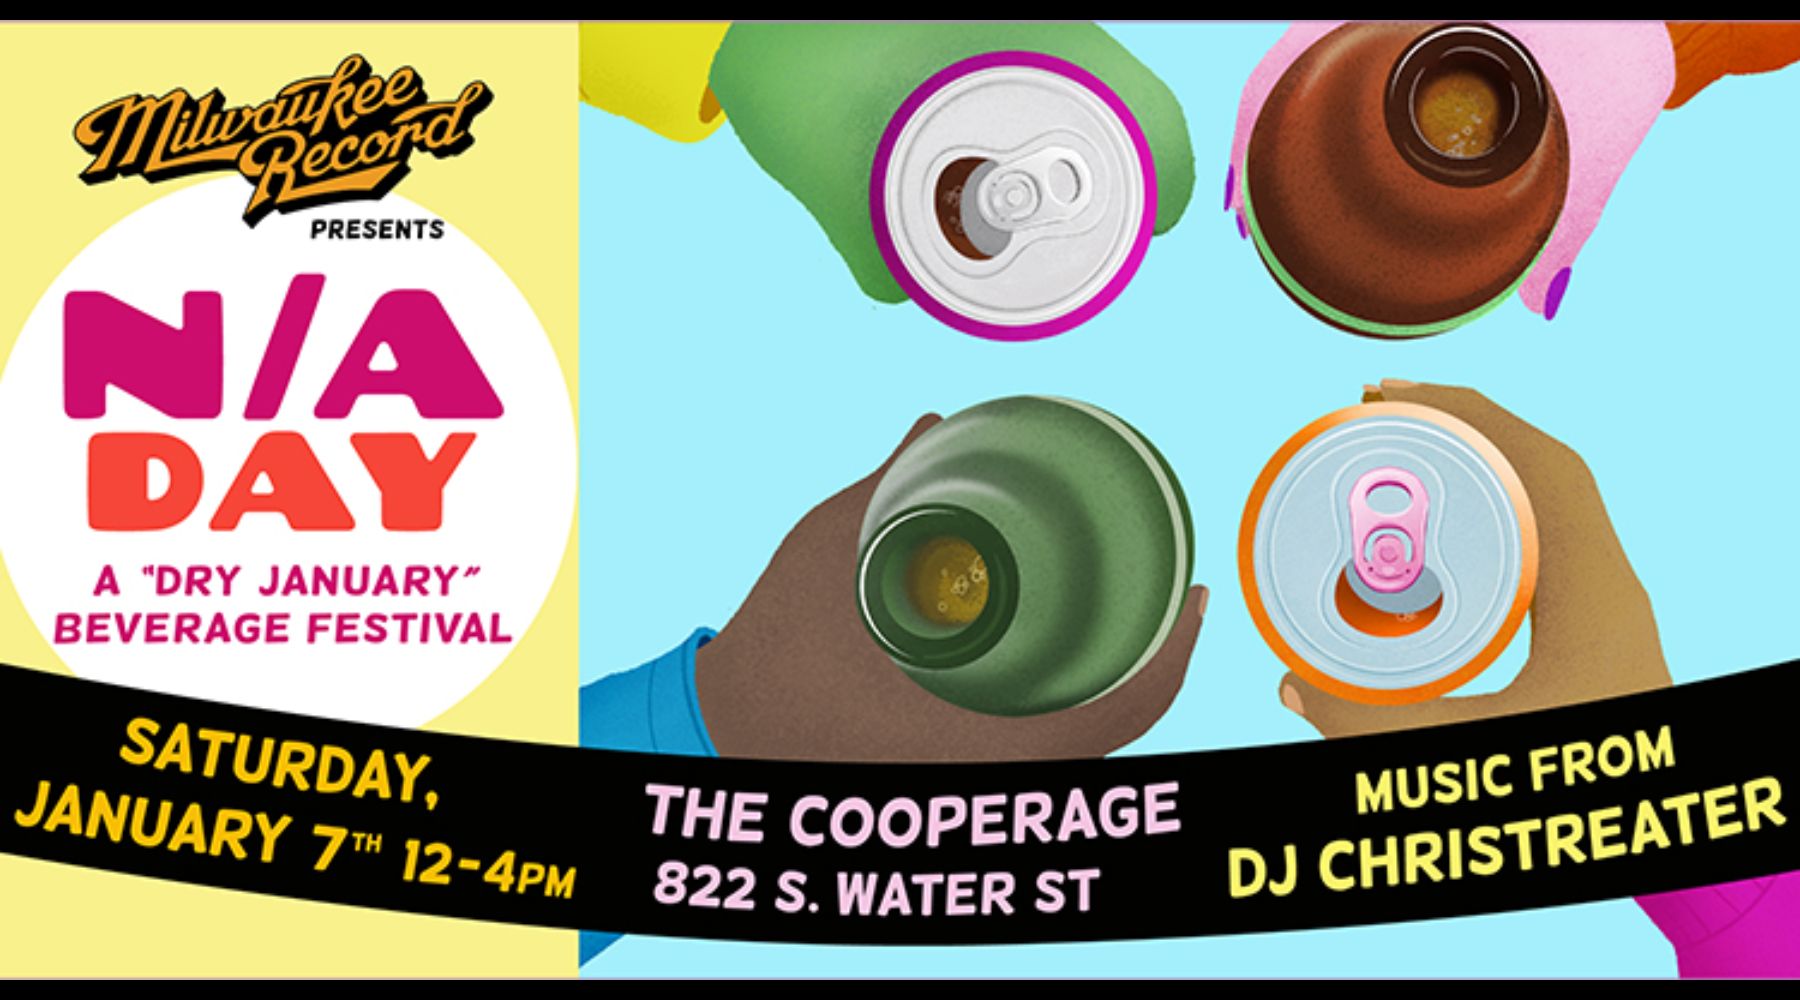 Milwaukee Record: Our N/A Day “Dry January” beverage festival returns to The Cooperage on January 7